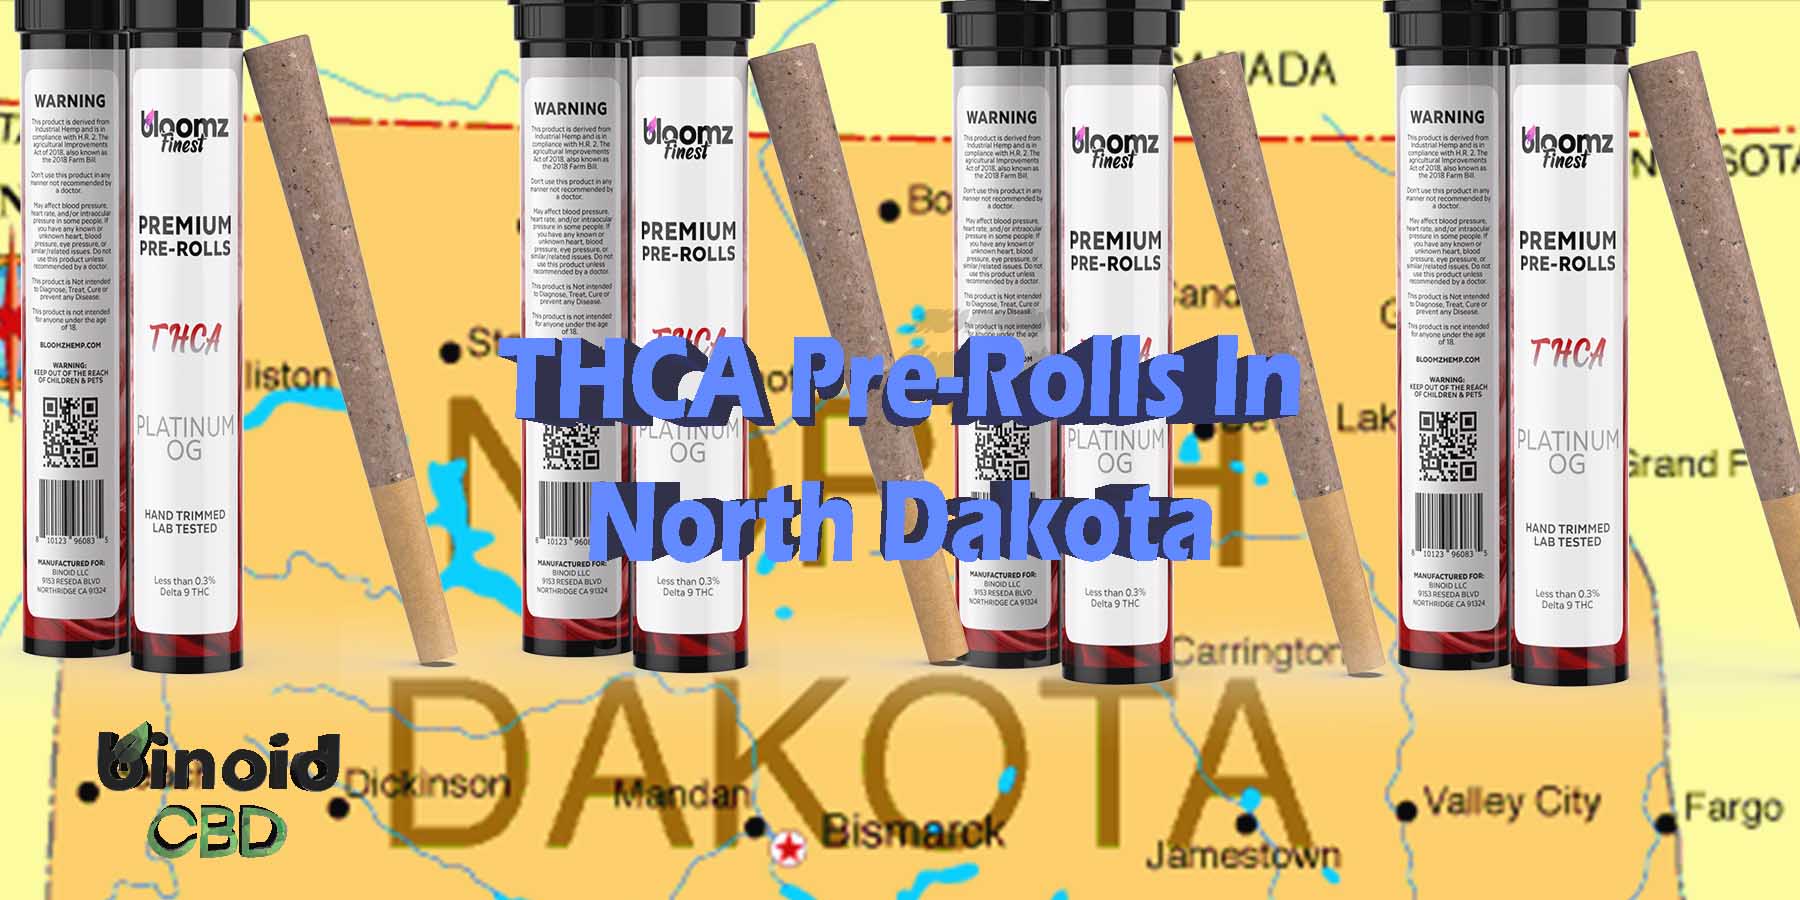 THCA Pre-Rolls-In North Dakota THCA Hemp Flower Indica Where To Get Near Me Best Place Lowest Price Coupon Discount Strongest Brand Bloomz